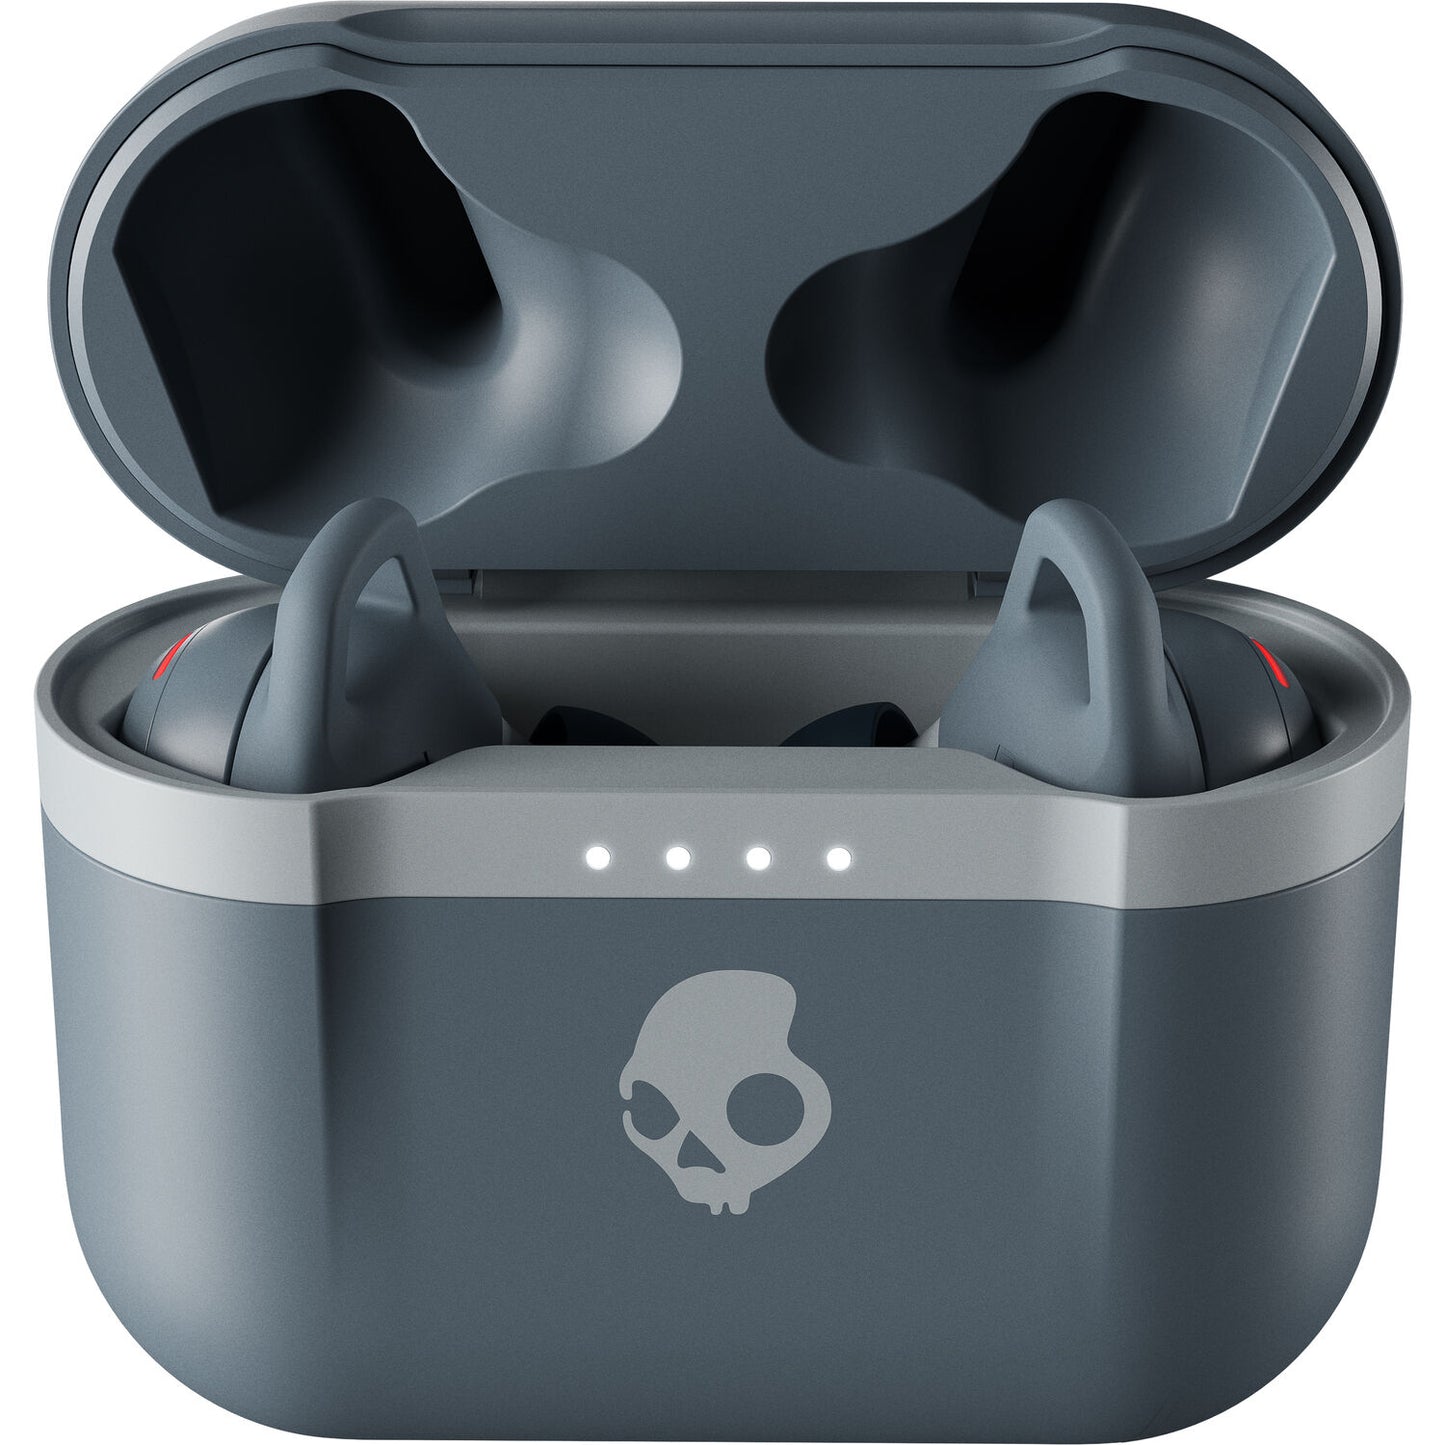 Skullcandy Indy Evo True Wireless Earbuds Bluetooth 5.0 Earphones with Mic, IP55 Water Resistance, 6-Hour Playtime, Rapid Charge (4 Colors Available)